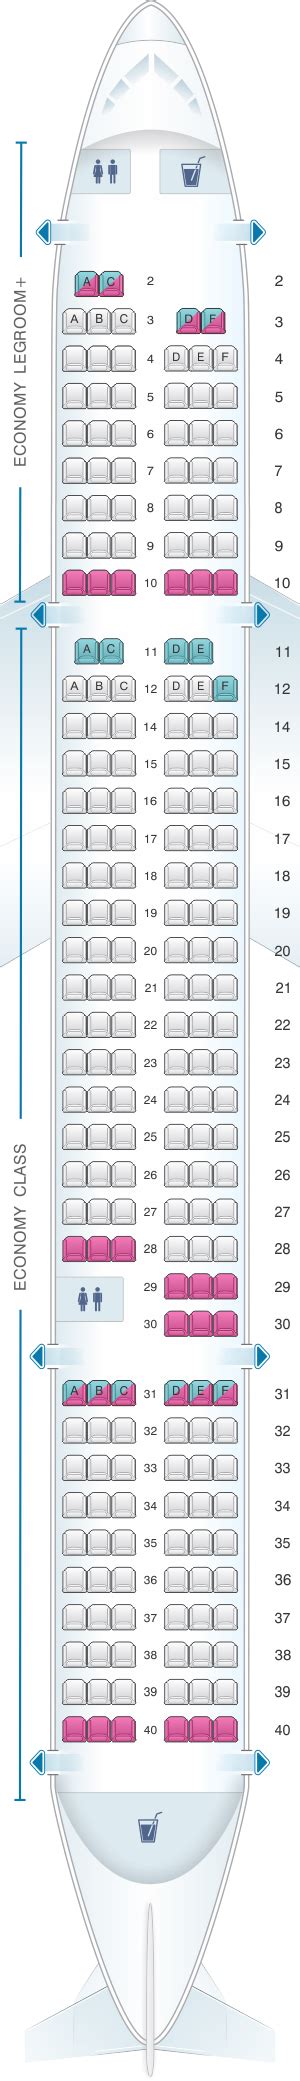 Seating chart allegiant airlines. Browse all of our featured airlines to get a comprehensive look at the carrier that best suits your travel needs. List of All Major Airlines - SeatGuru - SeatGuru Find seat map 